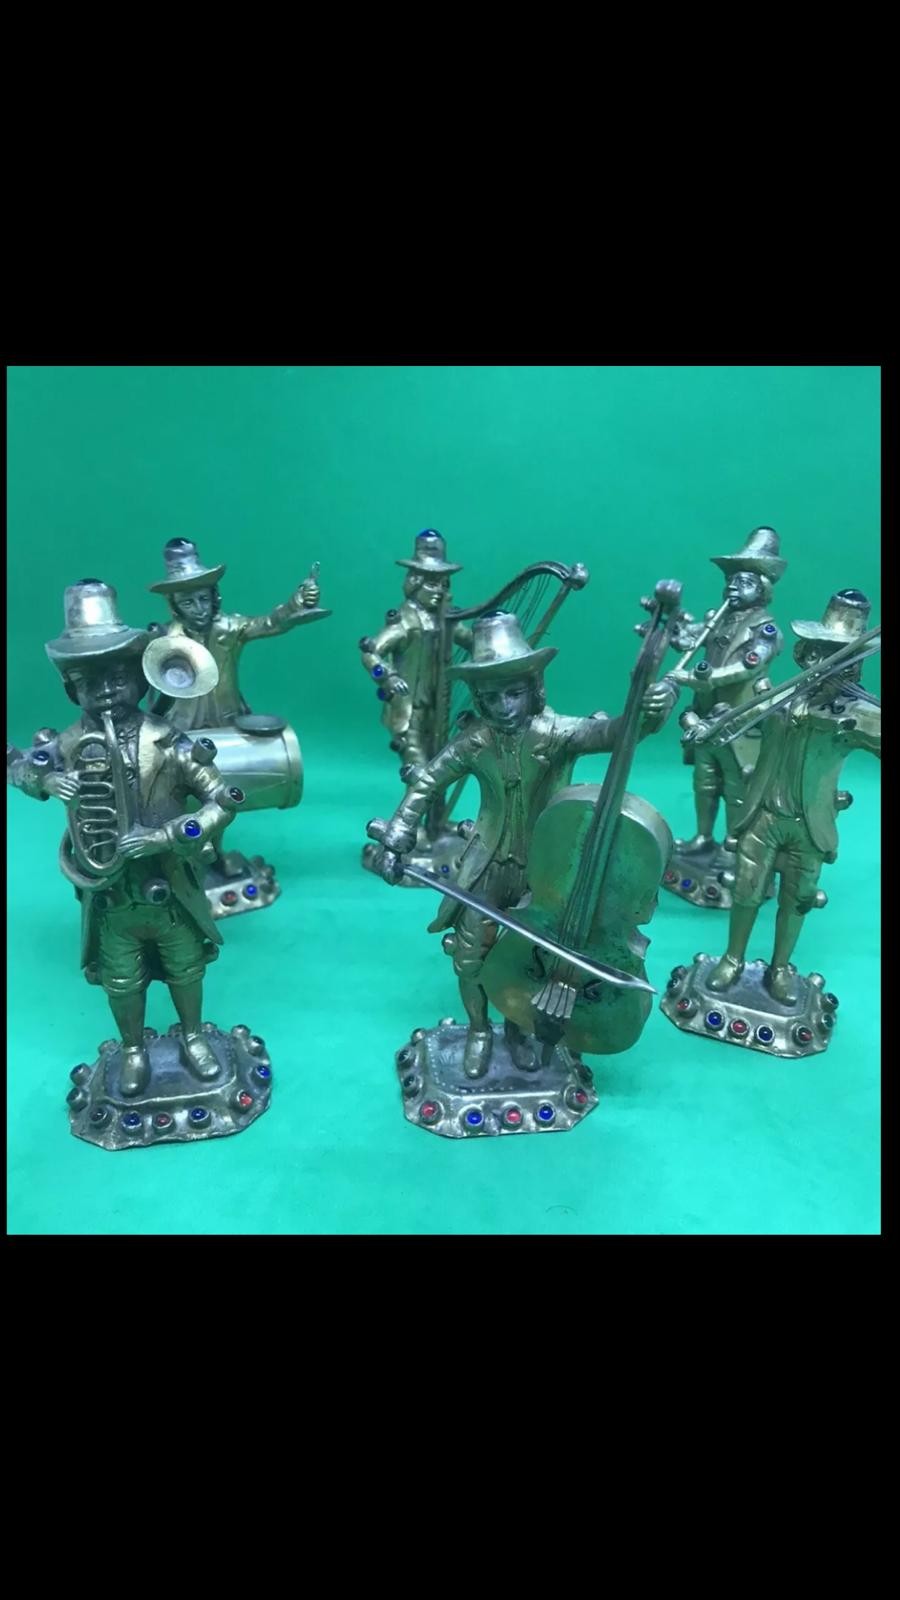 Antique 19th century German rare set of solid silver gem set musicians Each figure is 11.4 to 12cm - Image 14 of 20